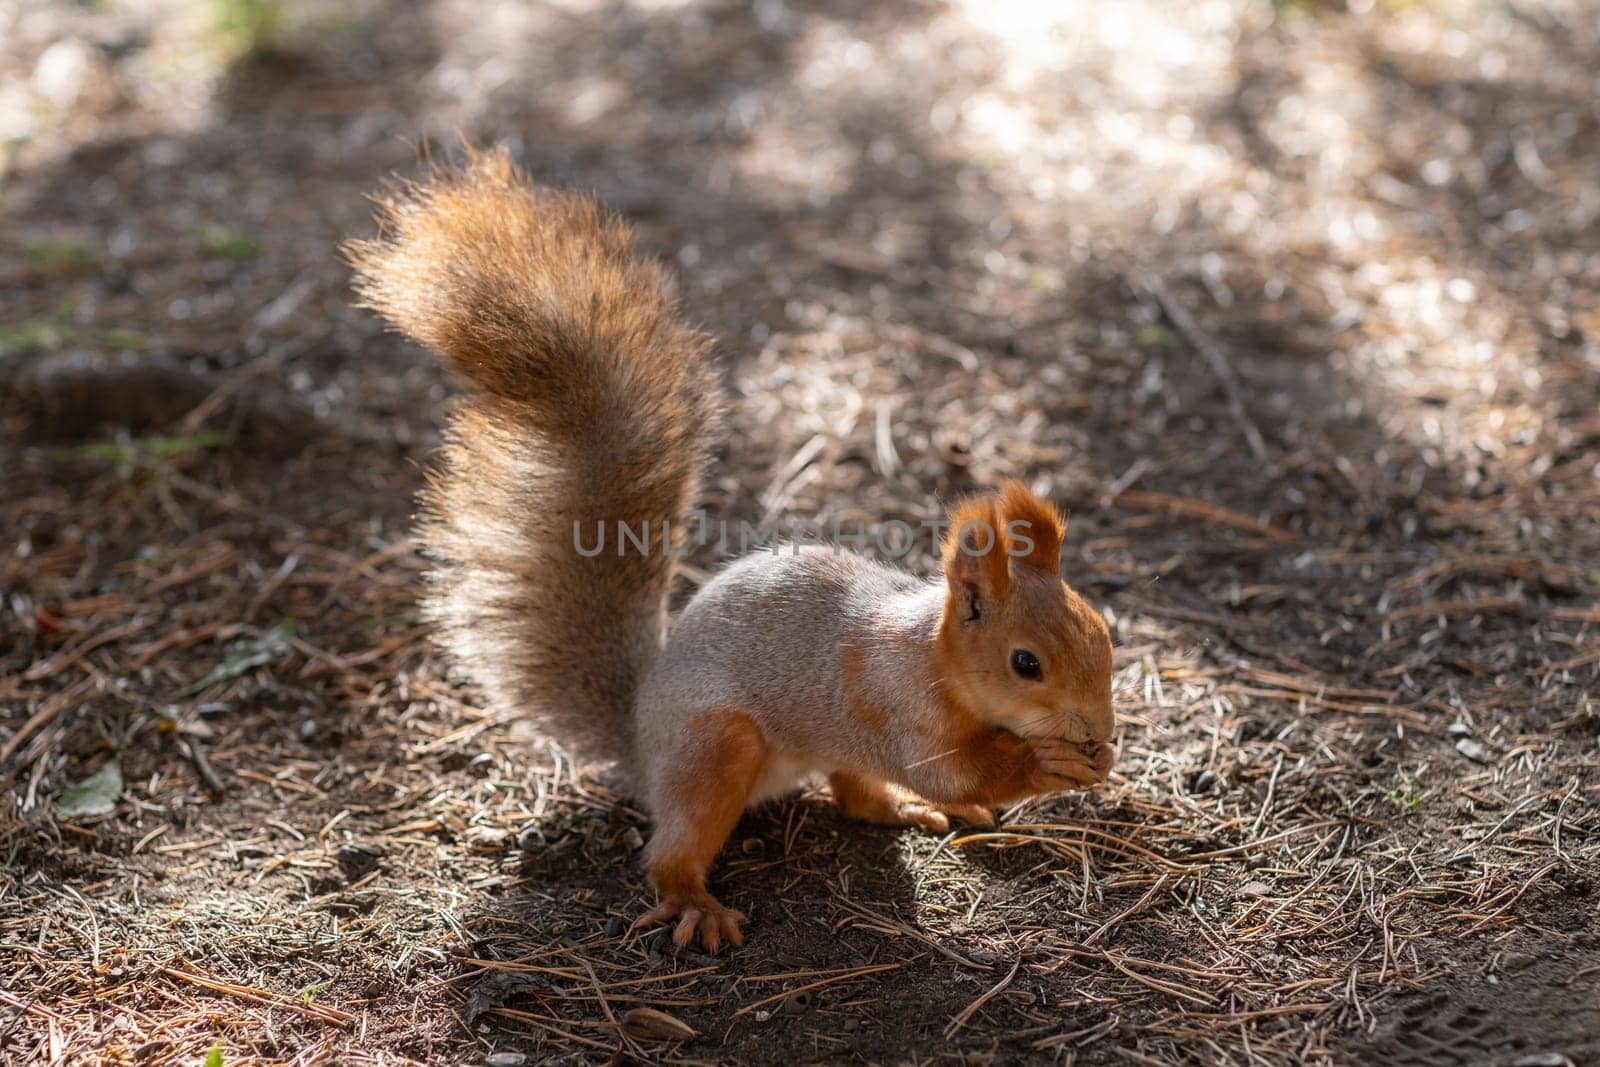 A beautiful red squirrel eats nuts in the forest. A squirrel with a fluffy tail sits and eats nuts close-up. Slow motion video